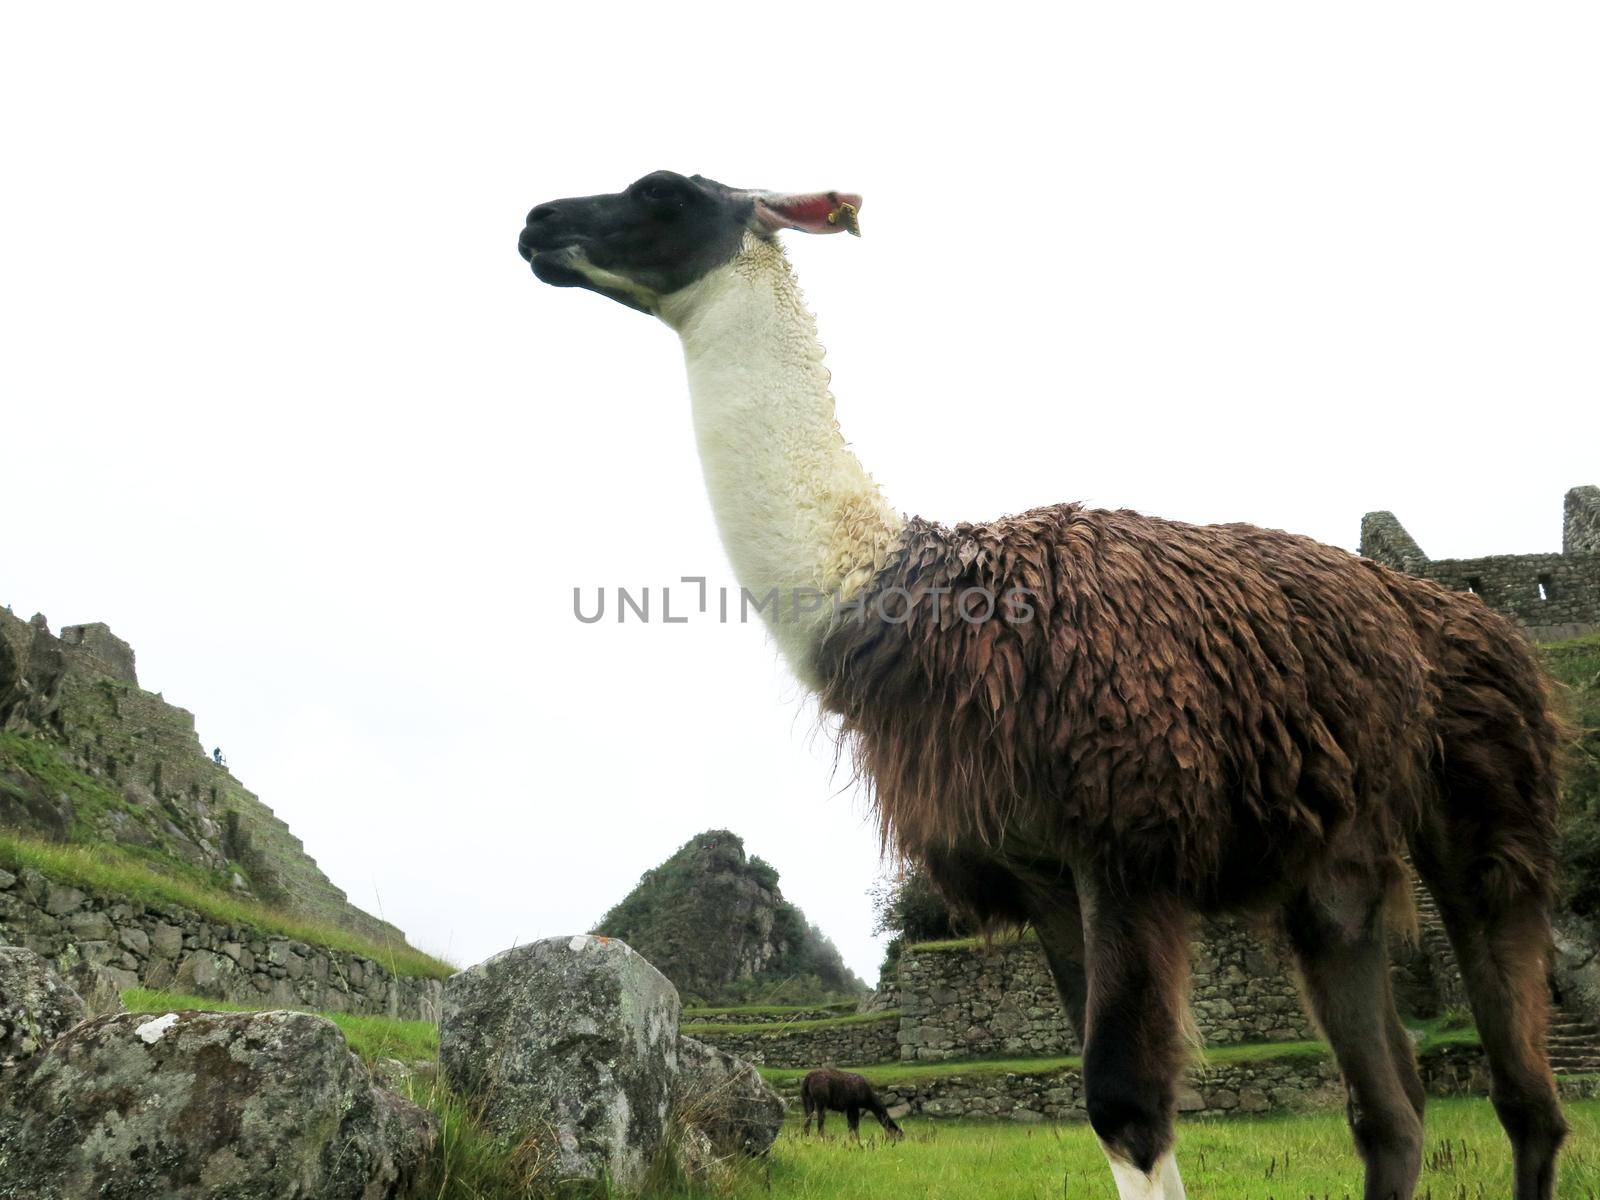 Llama at terraces and ancient houses Machu Picchu by aroas